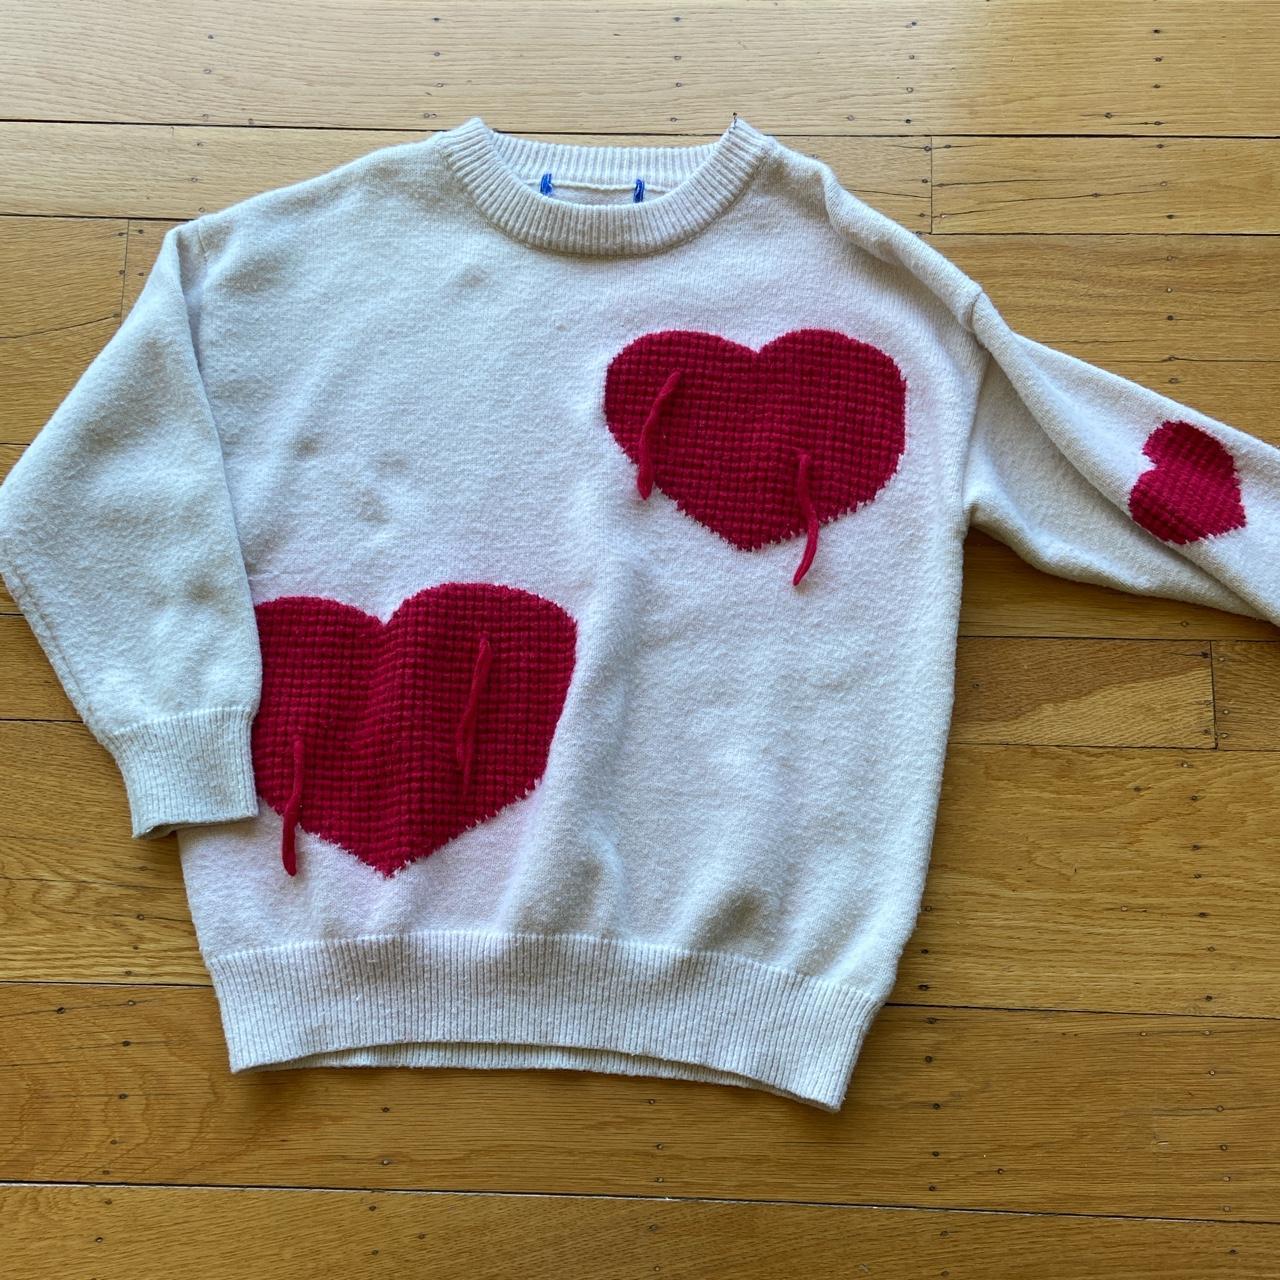 aelfric eden heart sweater perfect condition size M - Depop